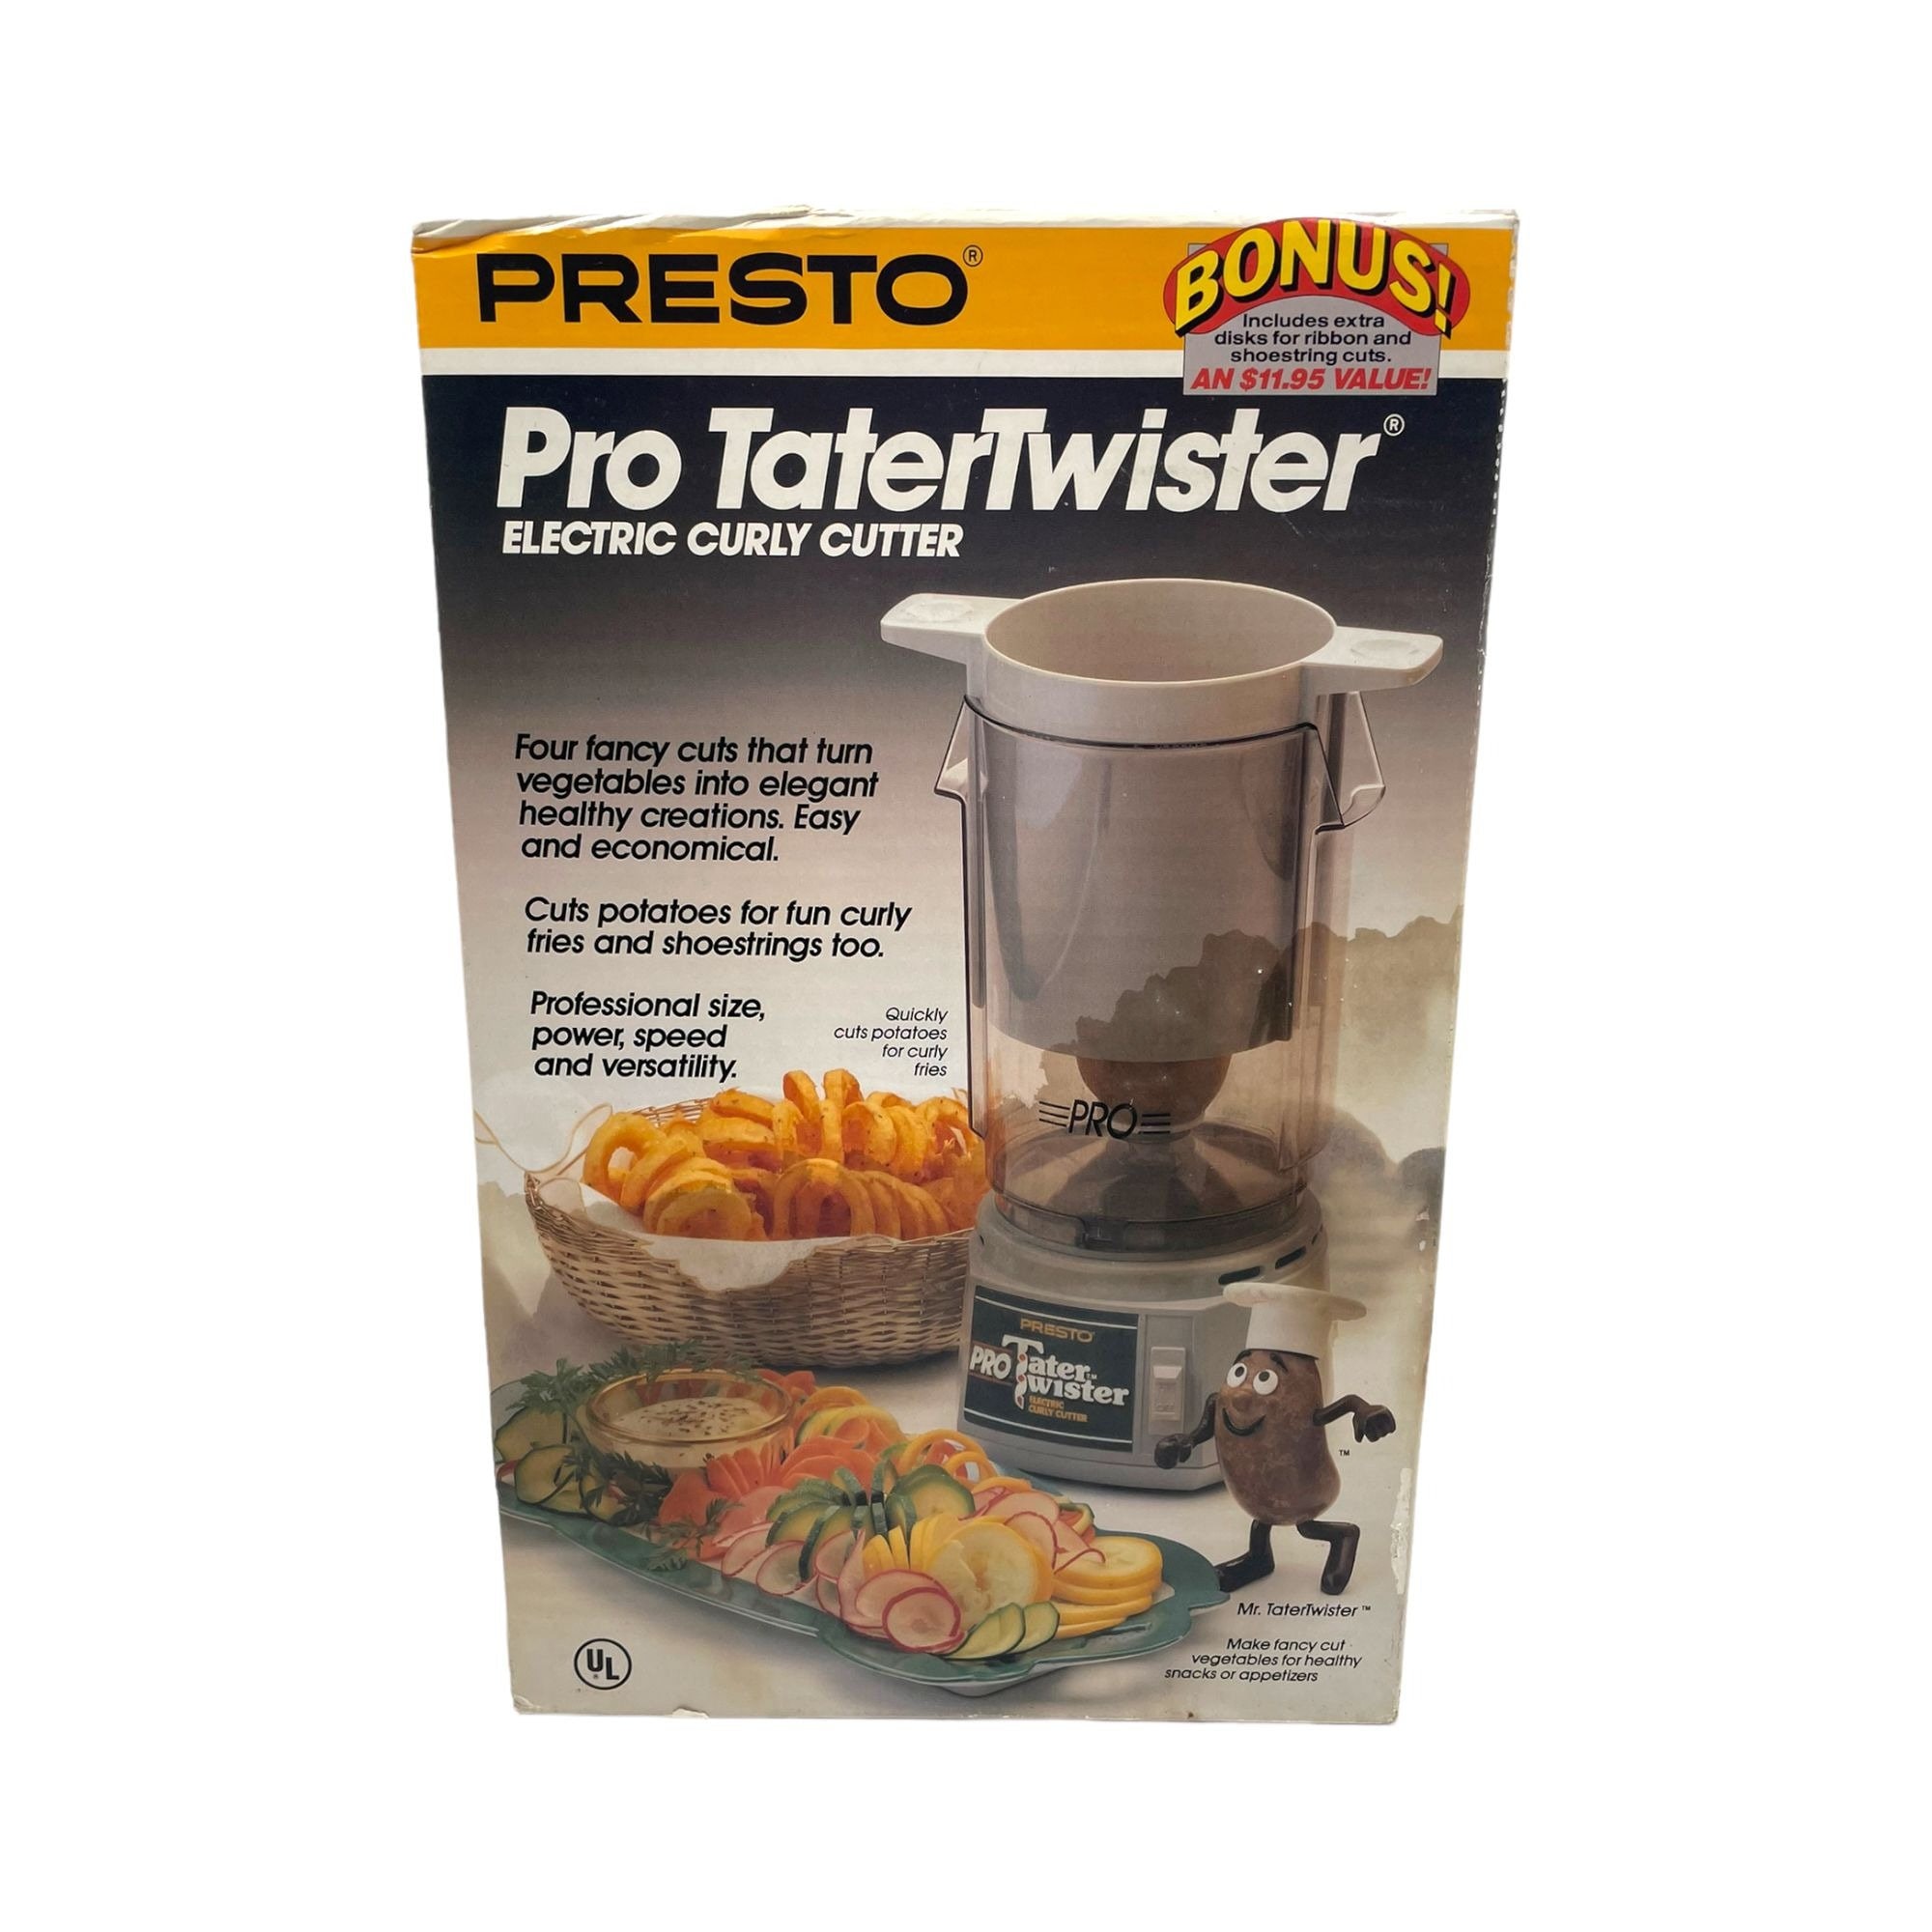 Presto Pro Tatertwister 02940 Electric Curly Cutter French - Etsy